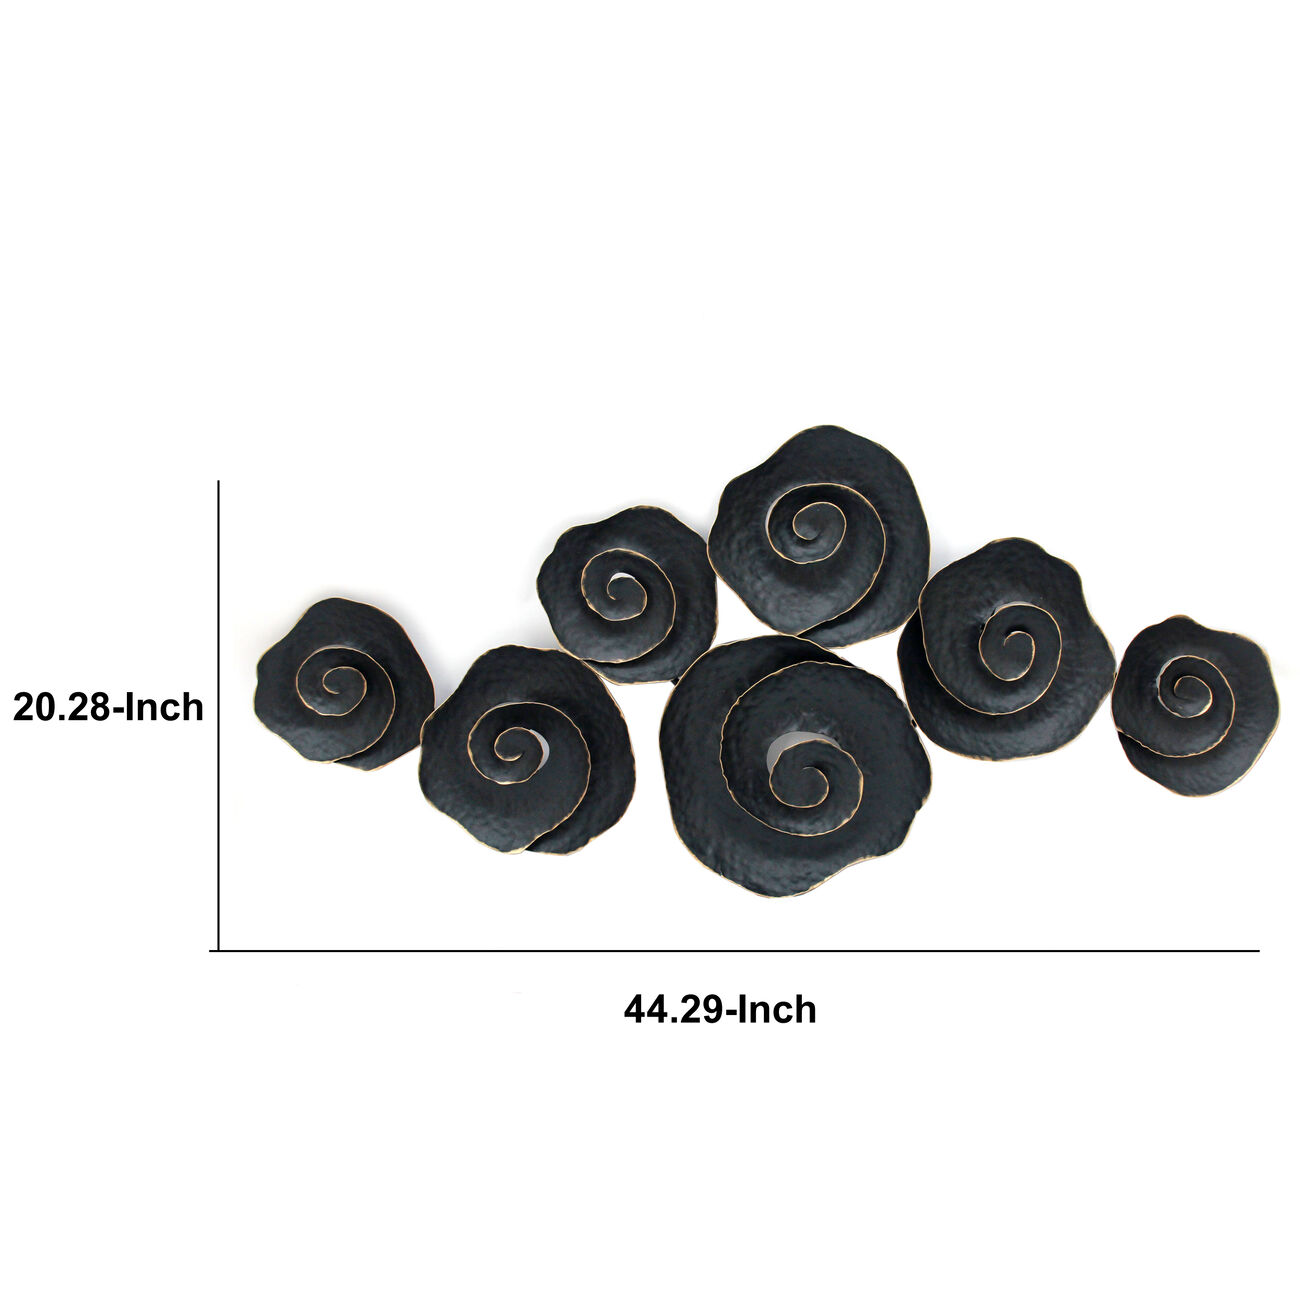 Decorative Metal Rose Wall Decor with Intricate Details,Gold and Black